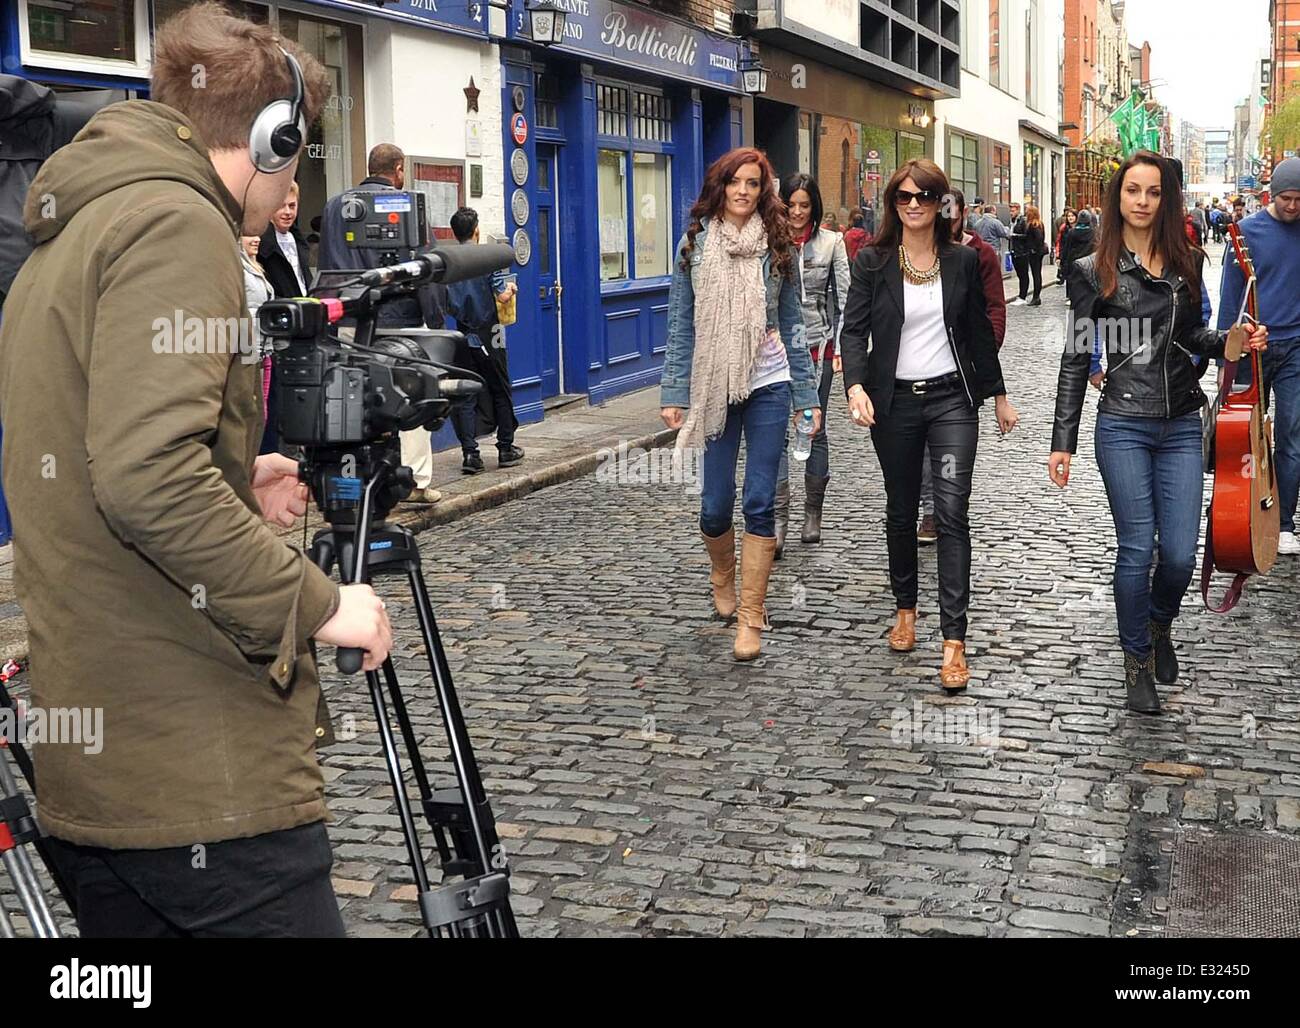 Irish girl band B*Witched busking for charity in Temple Bar Square while filming a segment for ITV's 'The Big Reunion'. B*Witched singer Sinead O'Carroll's mum even performed a little dance when the girls were singing their hit song 'C'est la Vie'.  Featu Stock Photo